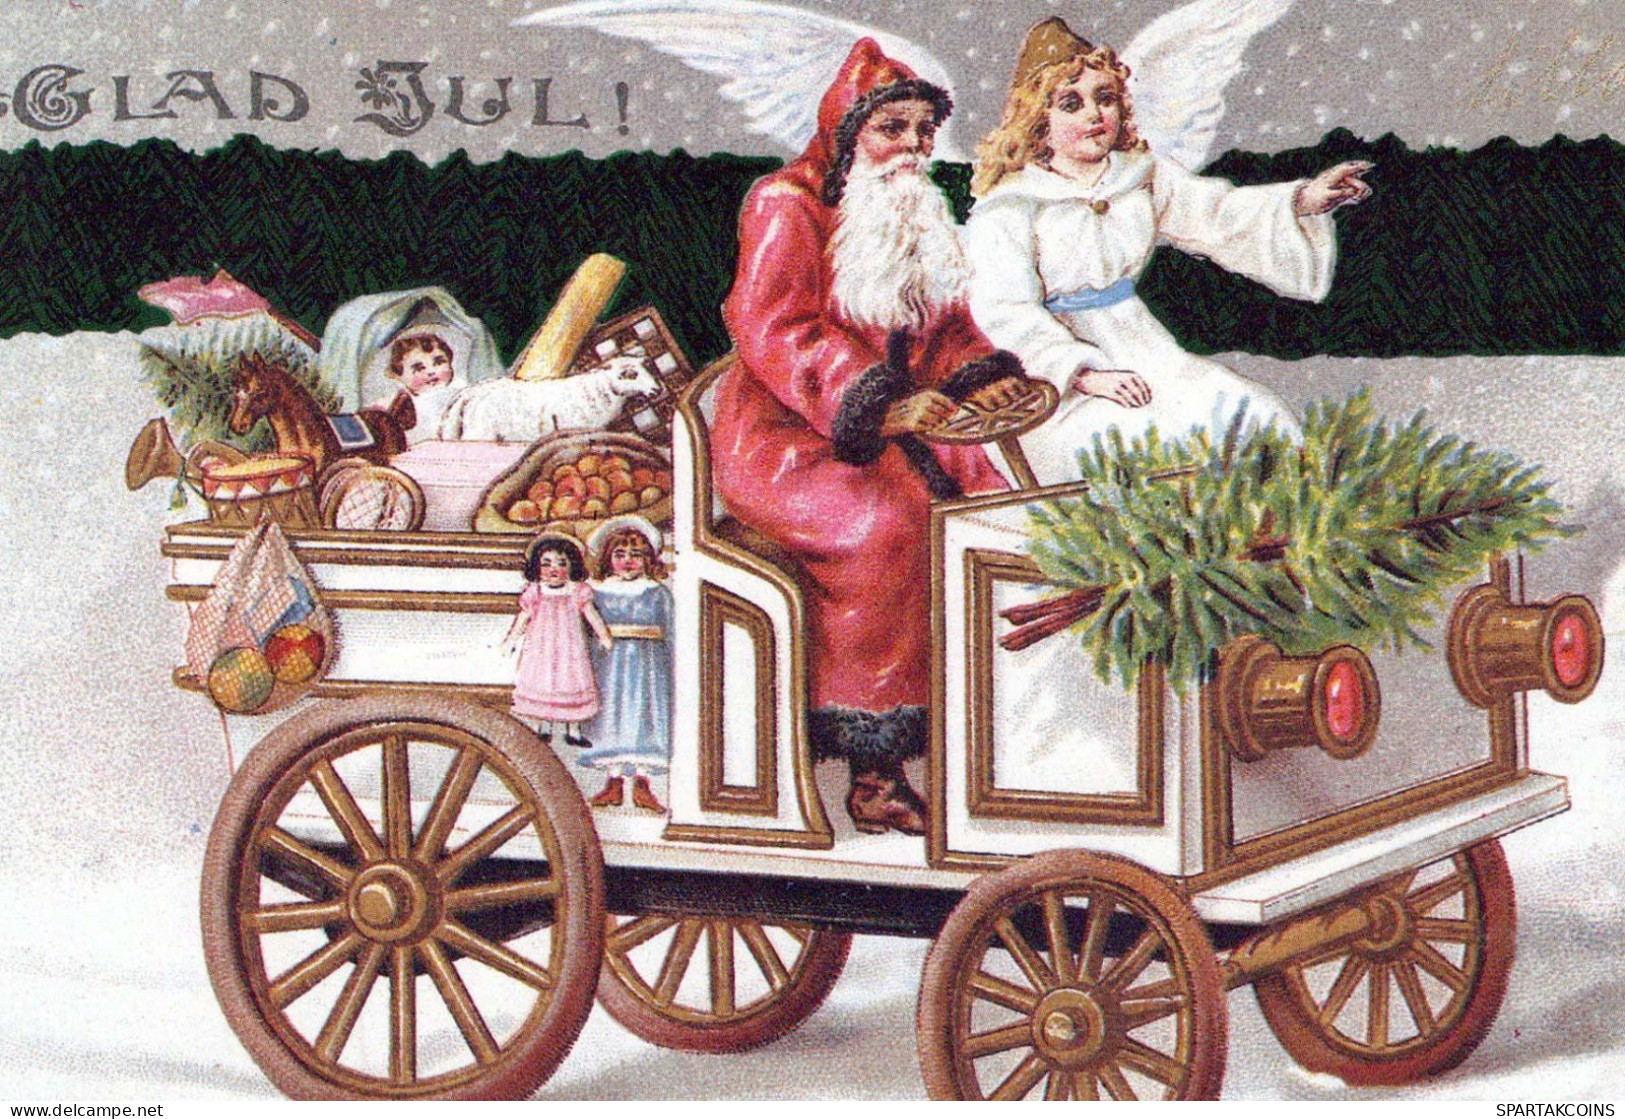 BABBO NATALE Buon Anno Natale Vintage Cartolina CPSM #PAW548.IT - Kerstman